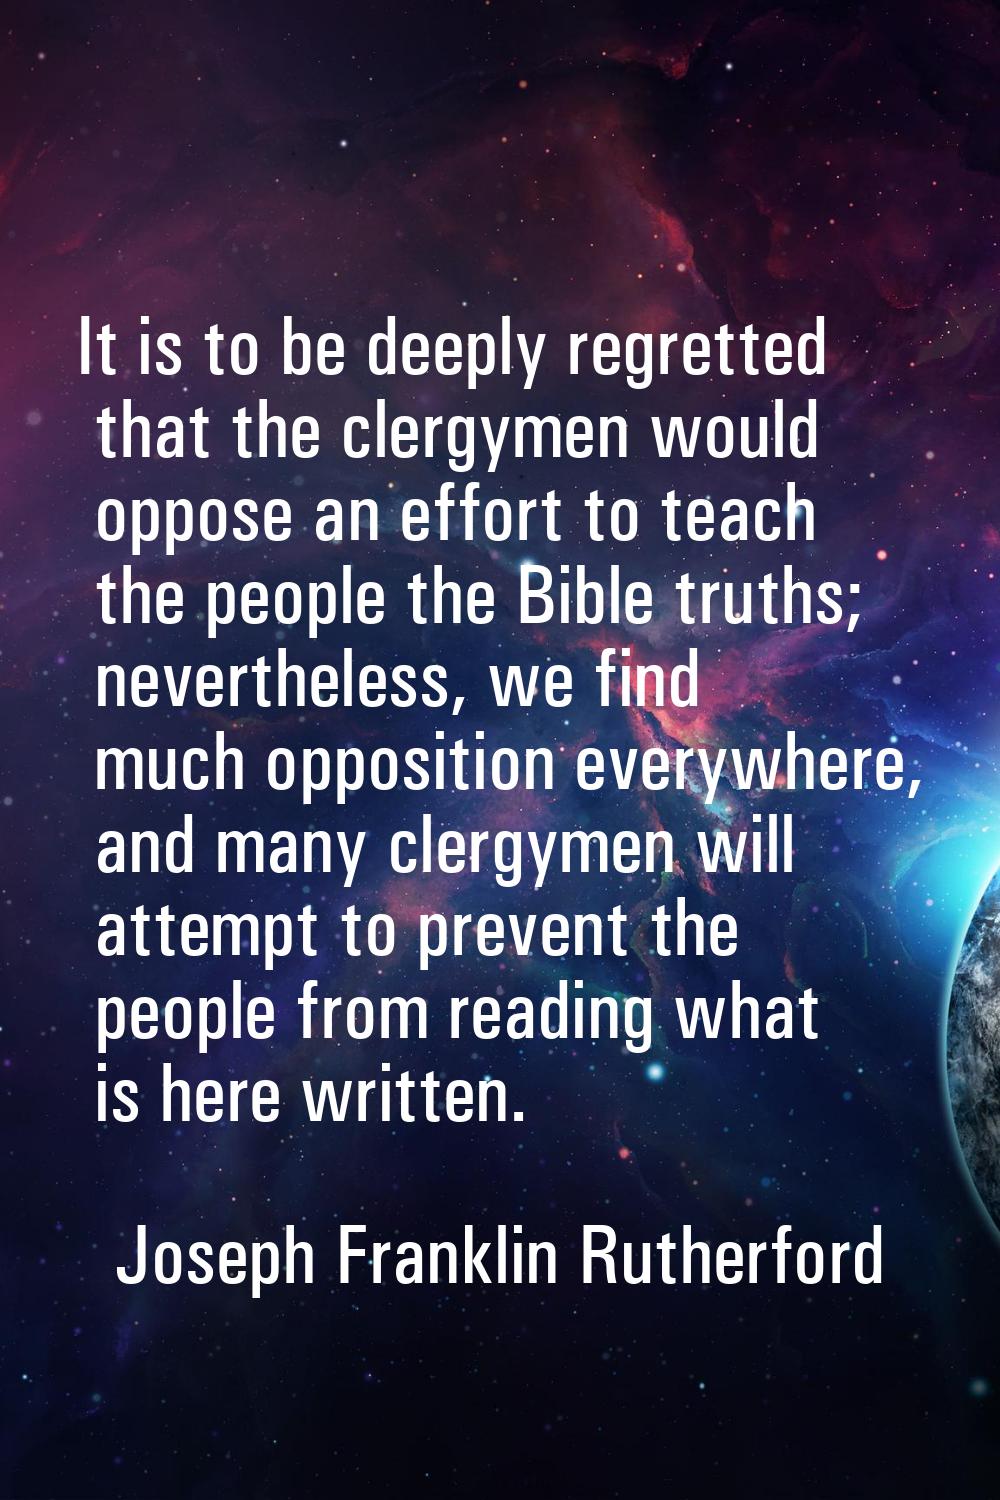 It is to be deeply regretted that the clergymen would oppose an effort to teach the people the Bibl